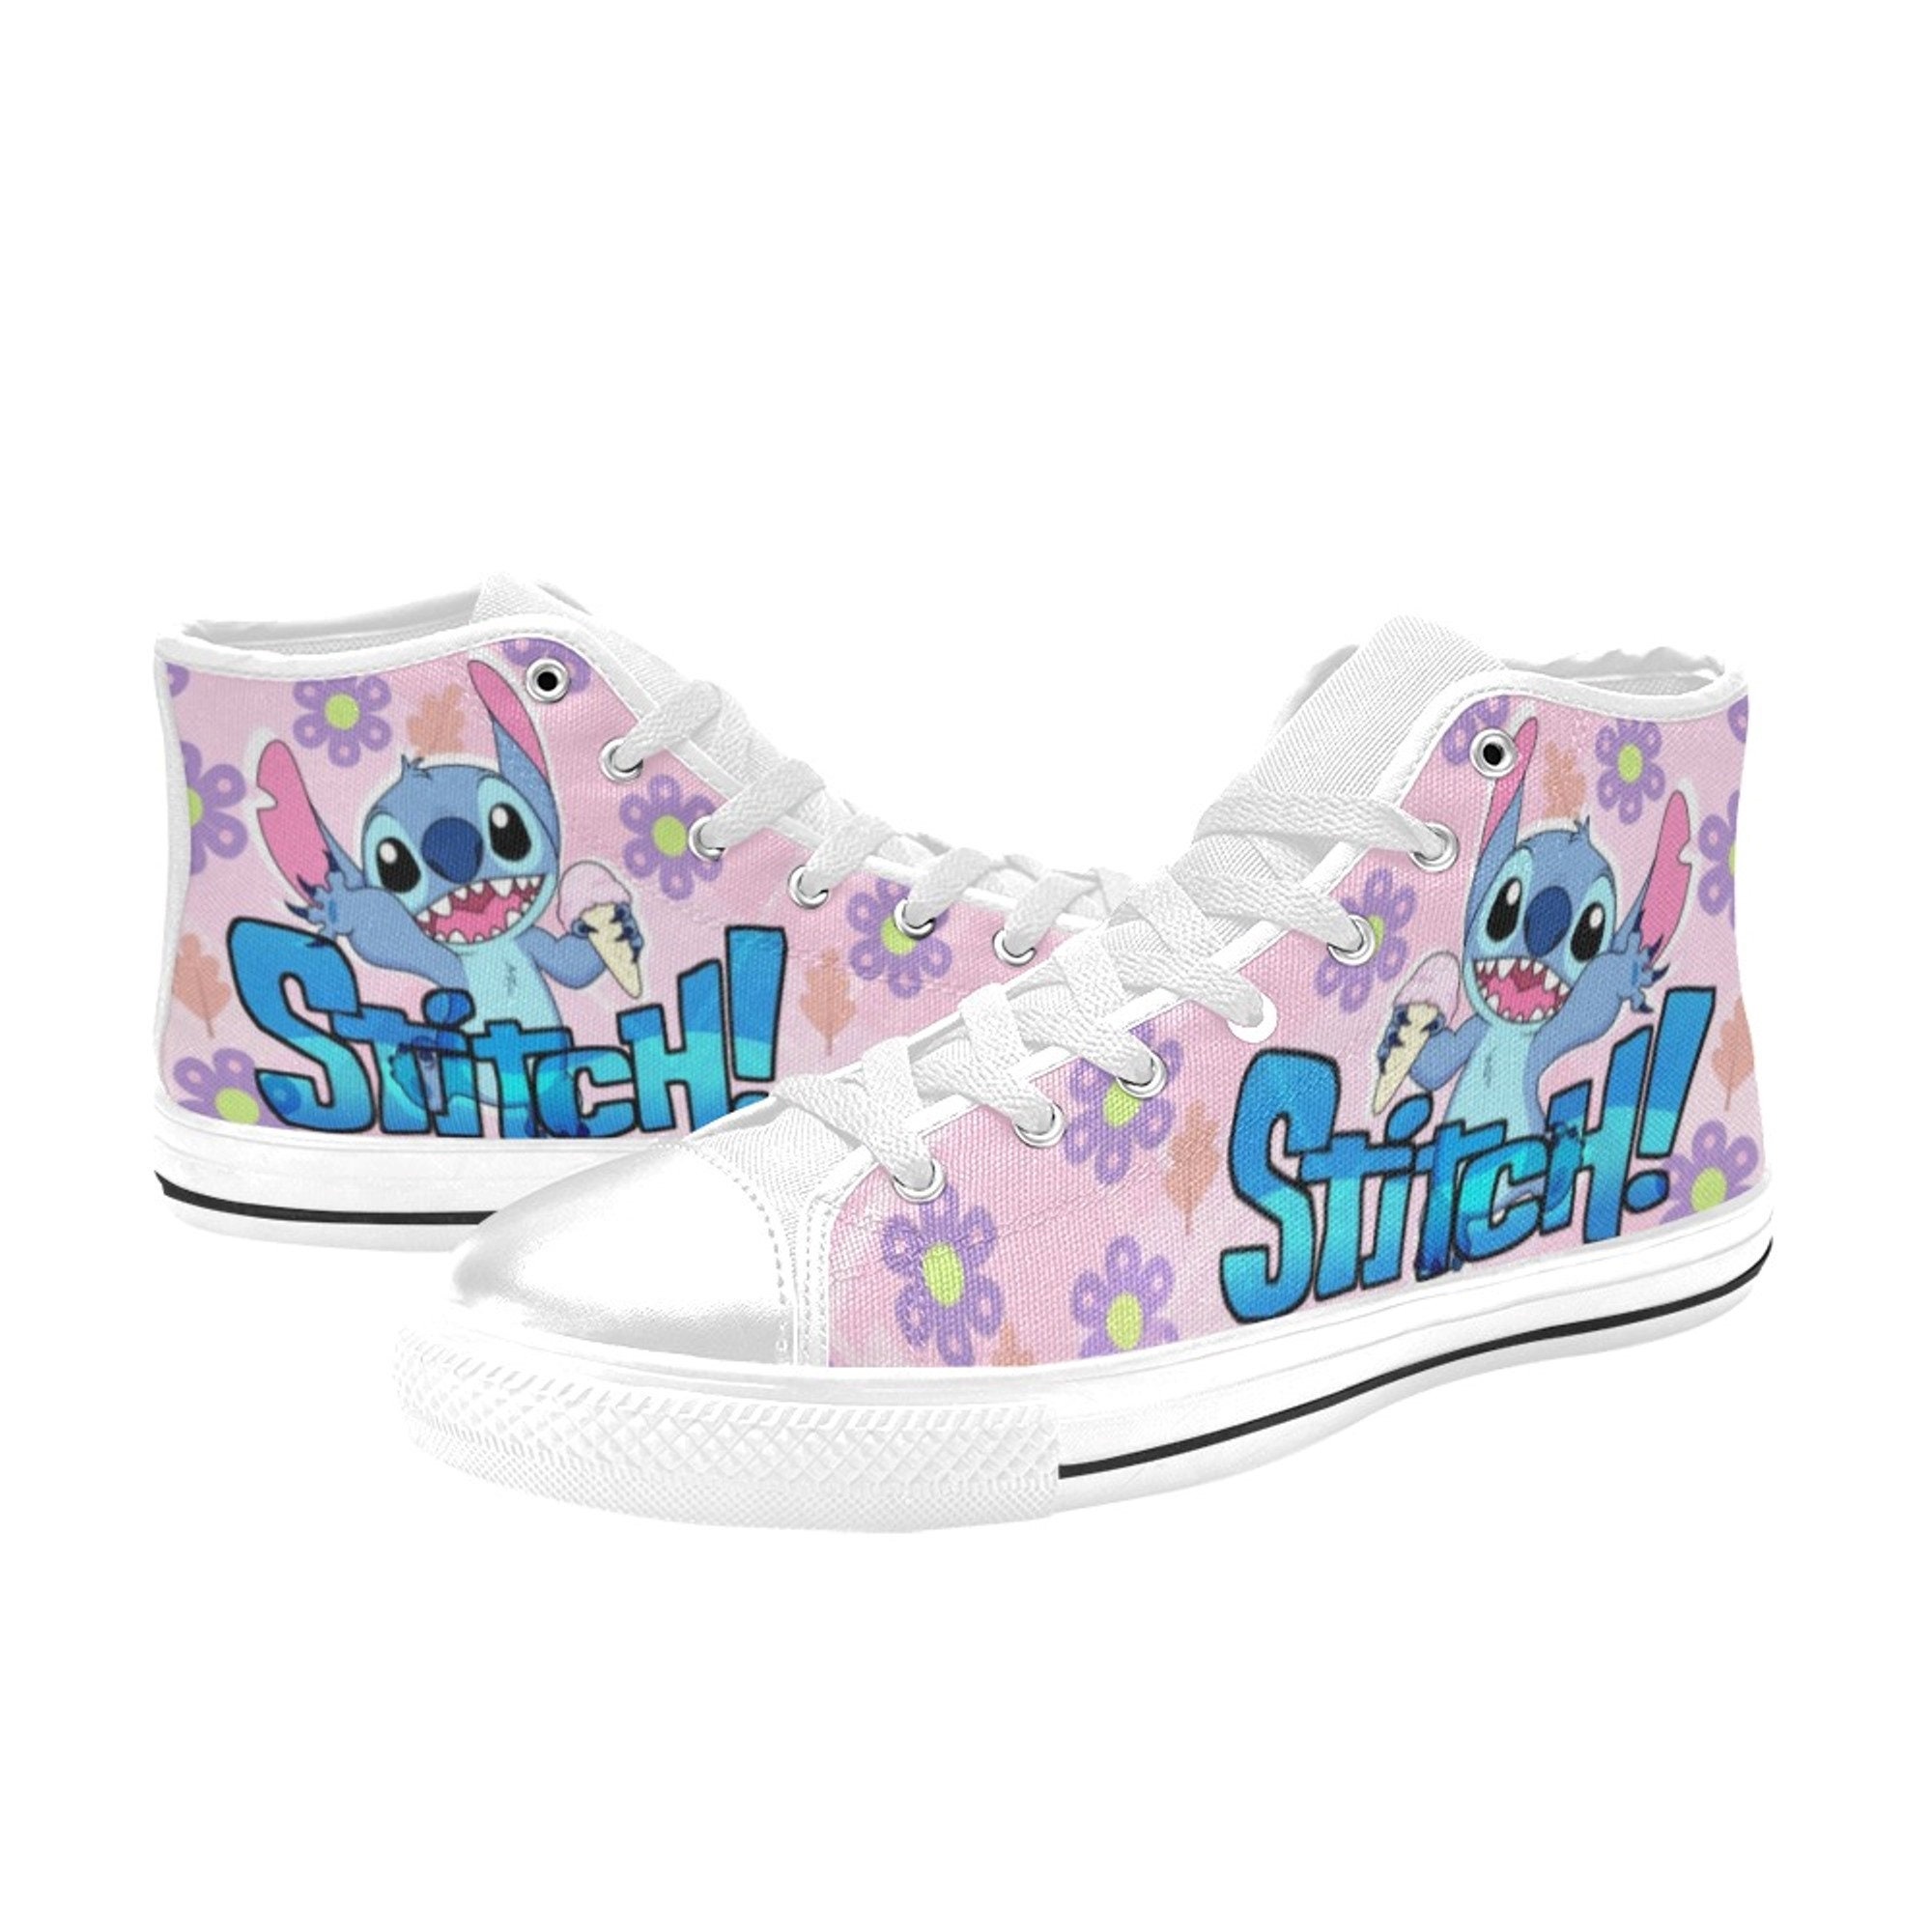 Discover Stitch Custom High Top Sneakers for Fans, Adults, Kids, Men and Women